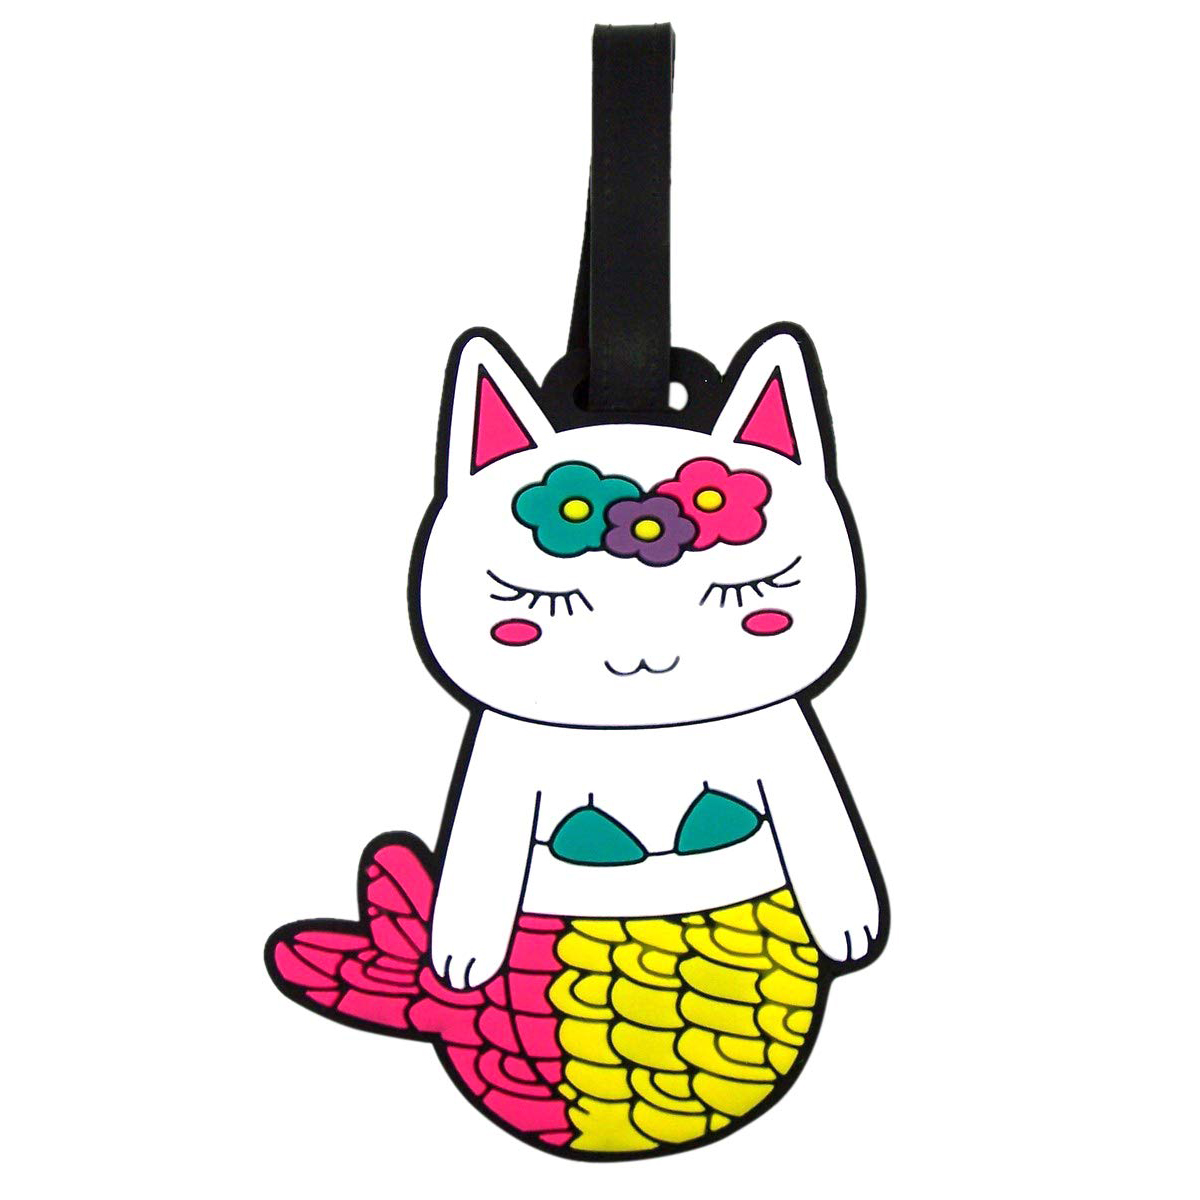 Hot Colorful Rubber Mermaid Cat Luggage Tag, 4 1/4 Inch, Pack of 2